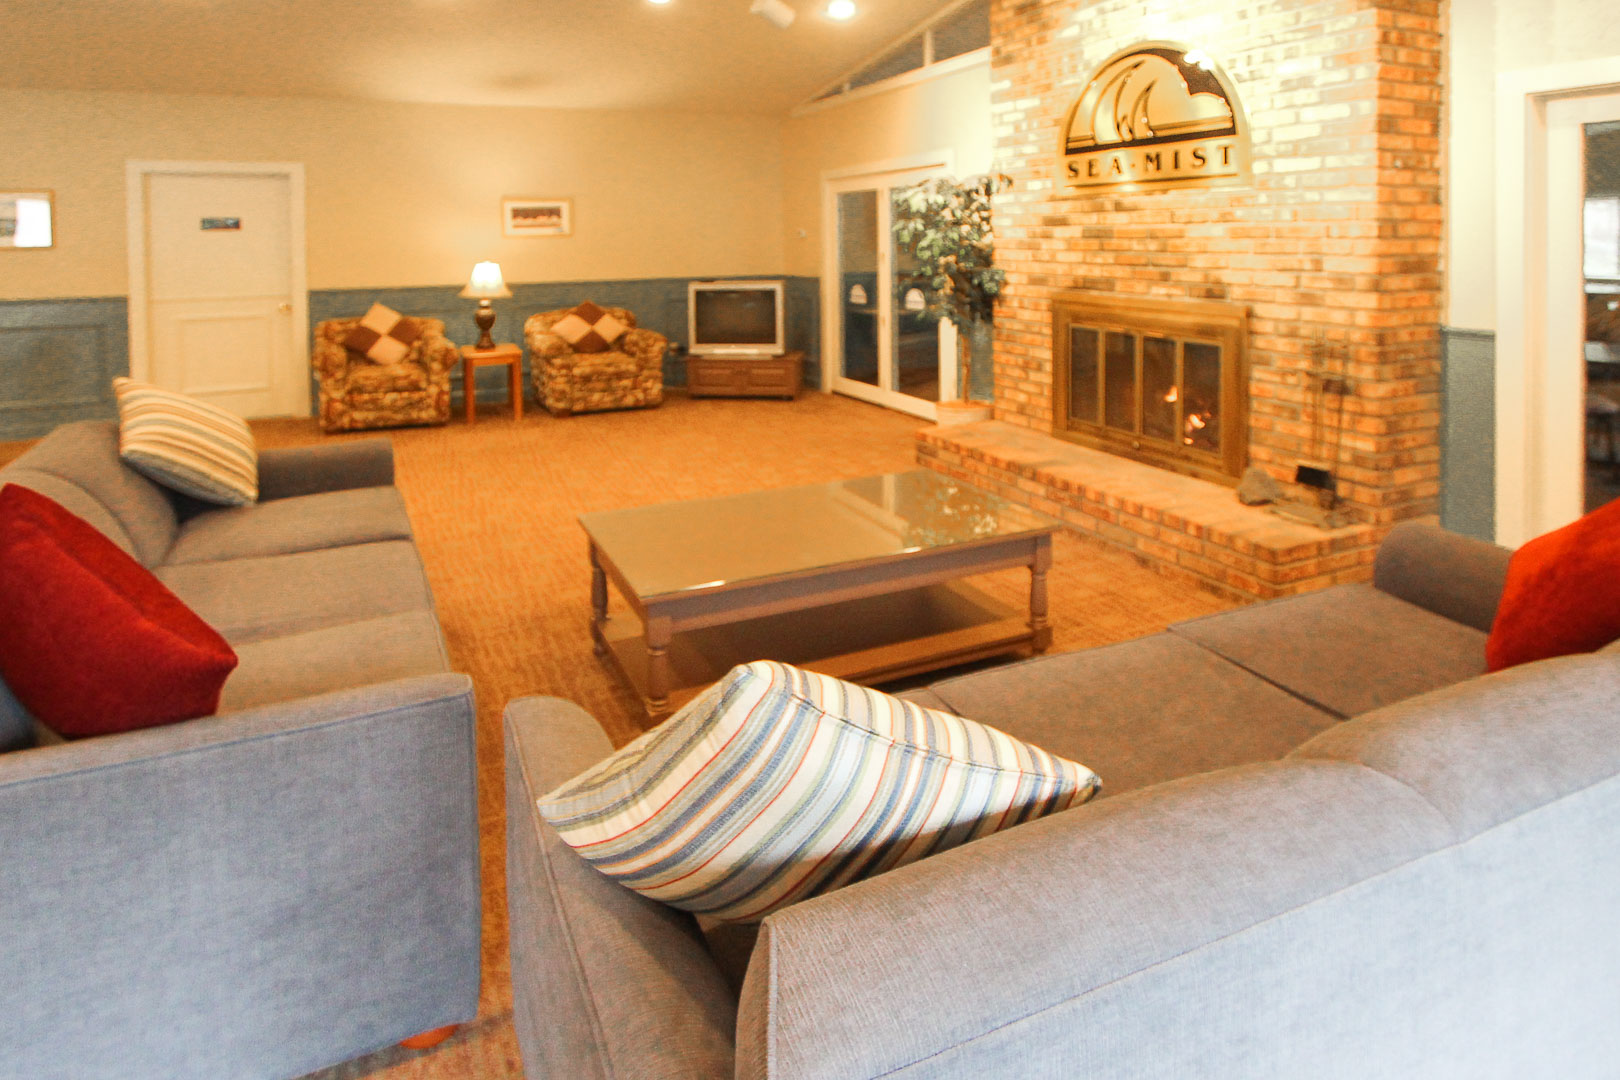 A welcoming lobby area at VRI's Sea Mist Resort in Massachusetts.